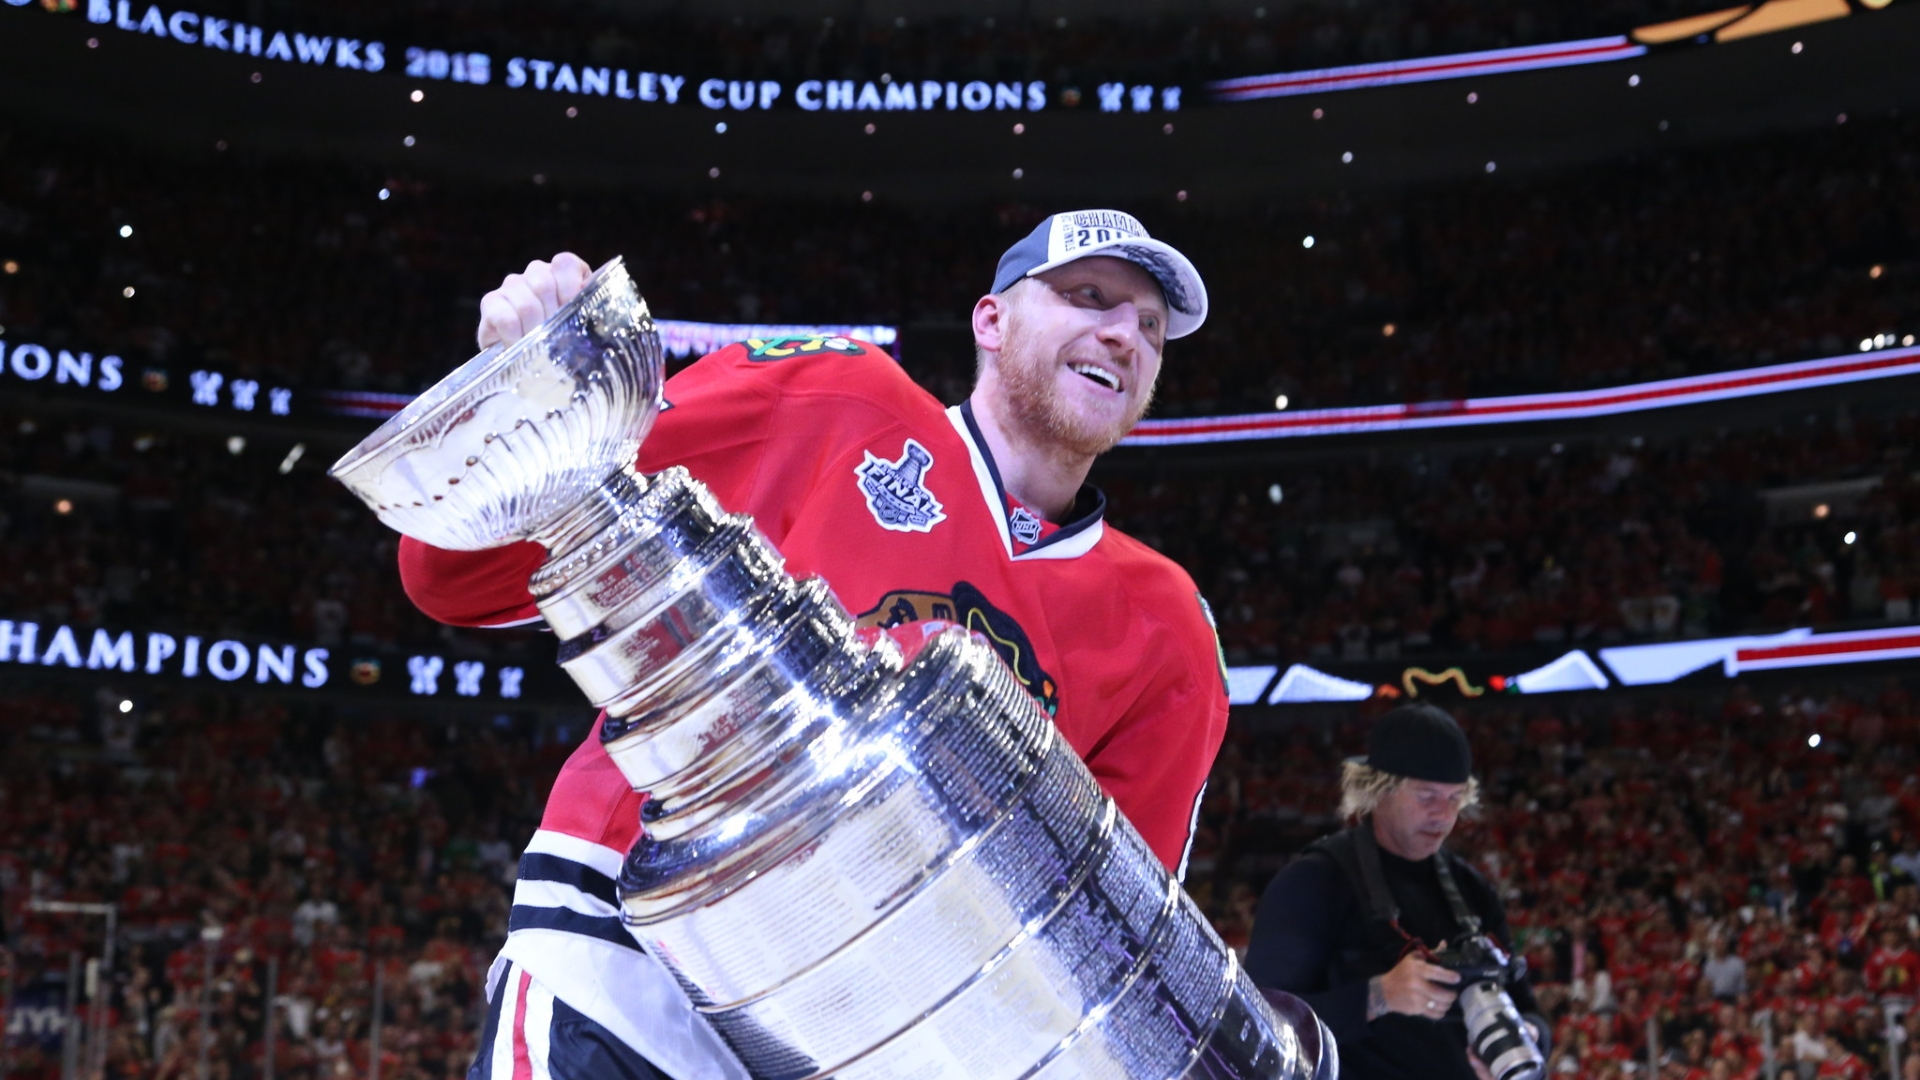 Why Blackhawks' Marian Hossa believes he could've played for 'a few more  years' – NBC Sports Chicago